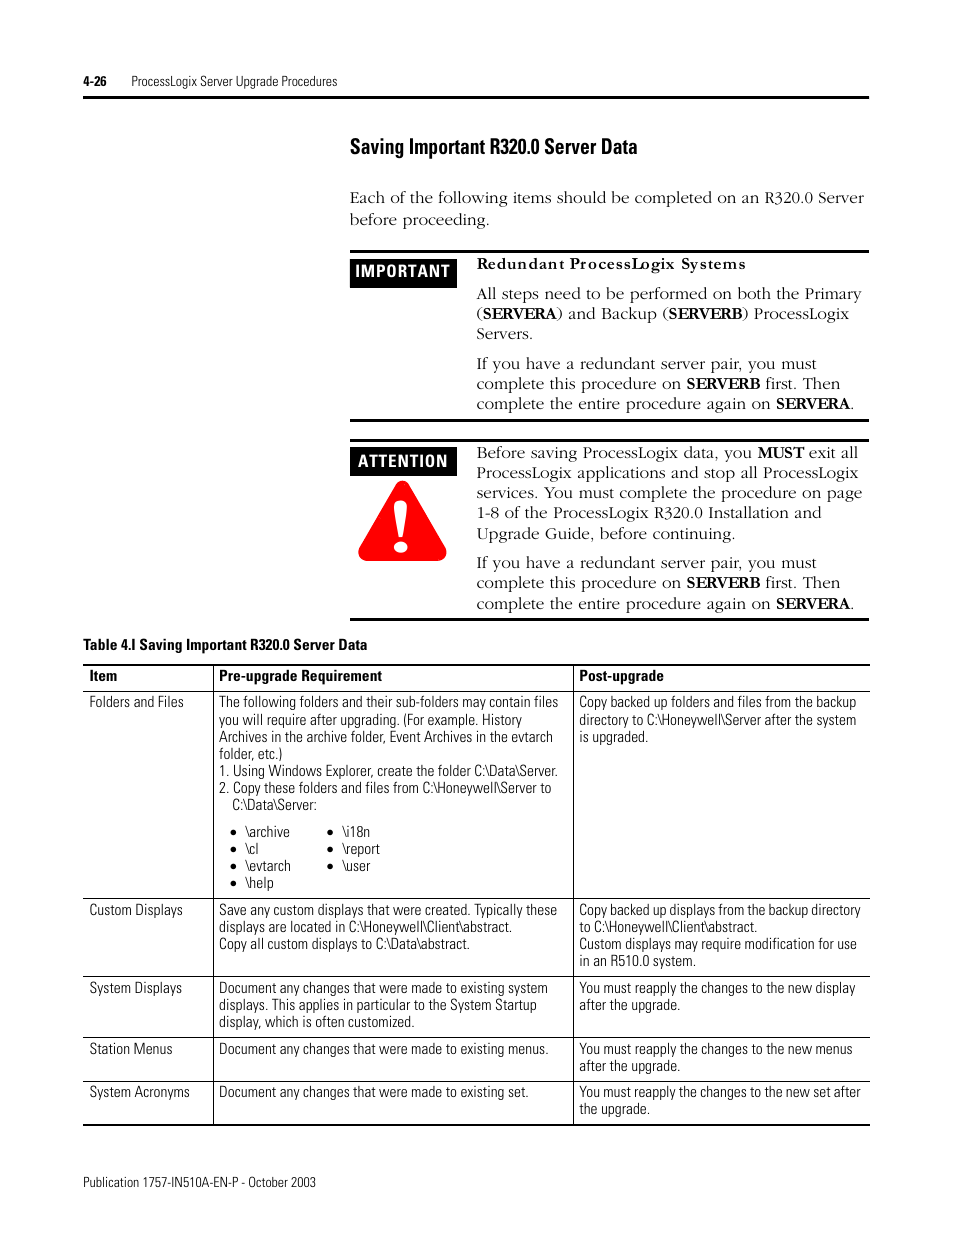 Saving important r320.0 server data, Saving important r320.0 server data -26 | Rockwell Automation 1757-SWKIT5100 ProcessLogix R510.0 Installation and Upgrade Guide User Manual | Page 110 / 271